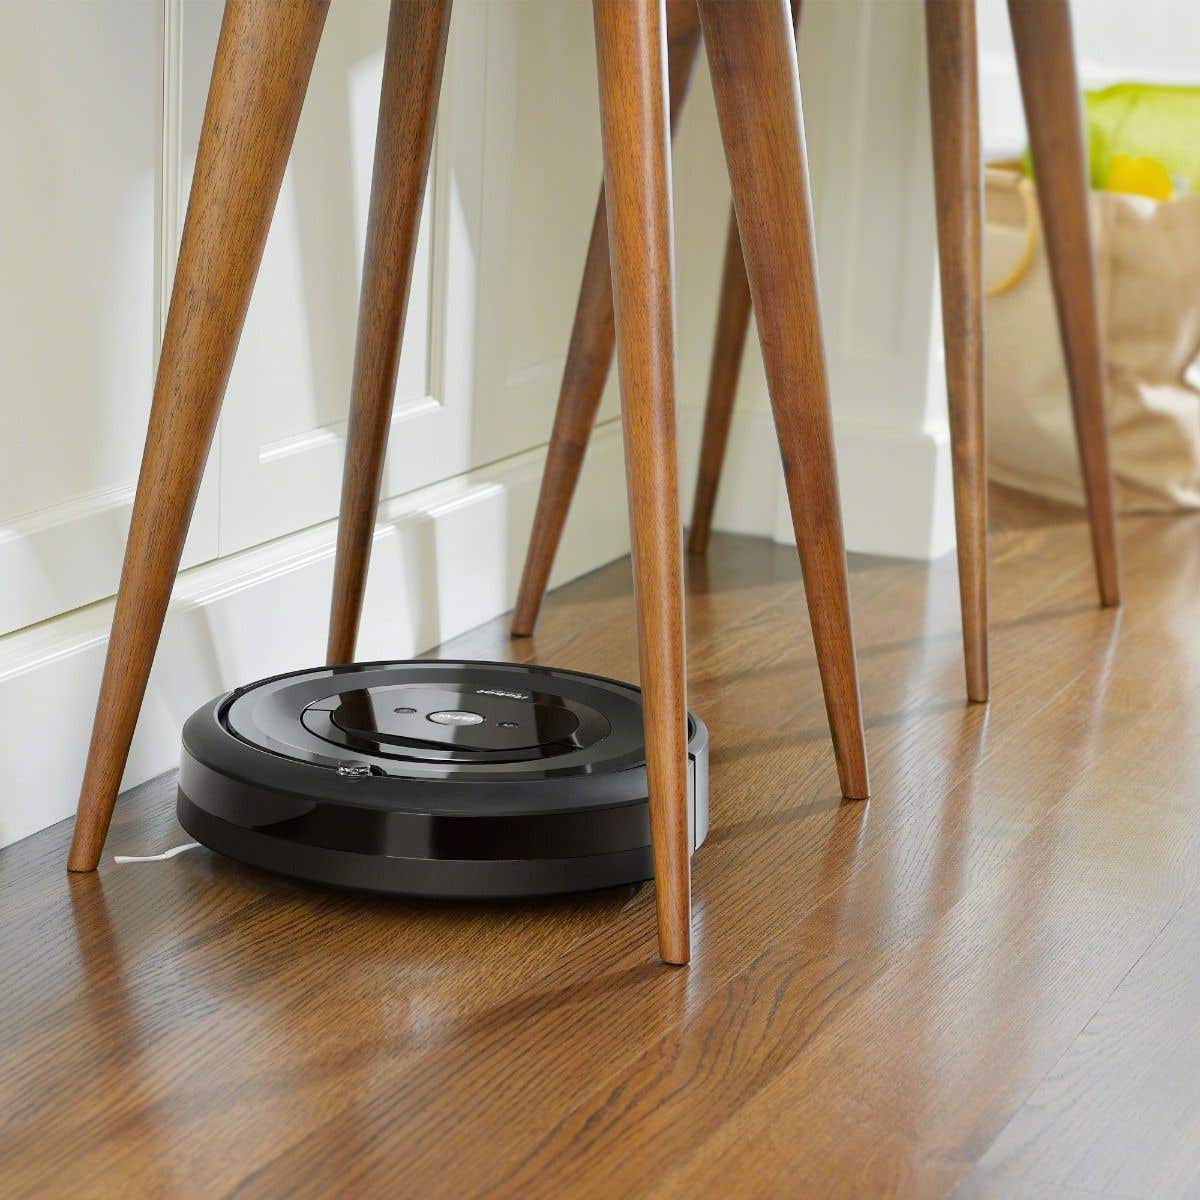 iRobot-Roomba-i7-Wi-Fi-Connected-Robot-Vacuum-Cleaner-listing-under-chair.